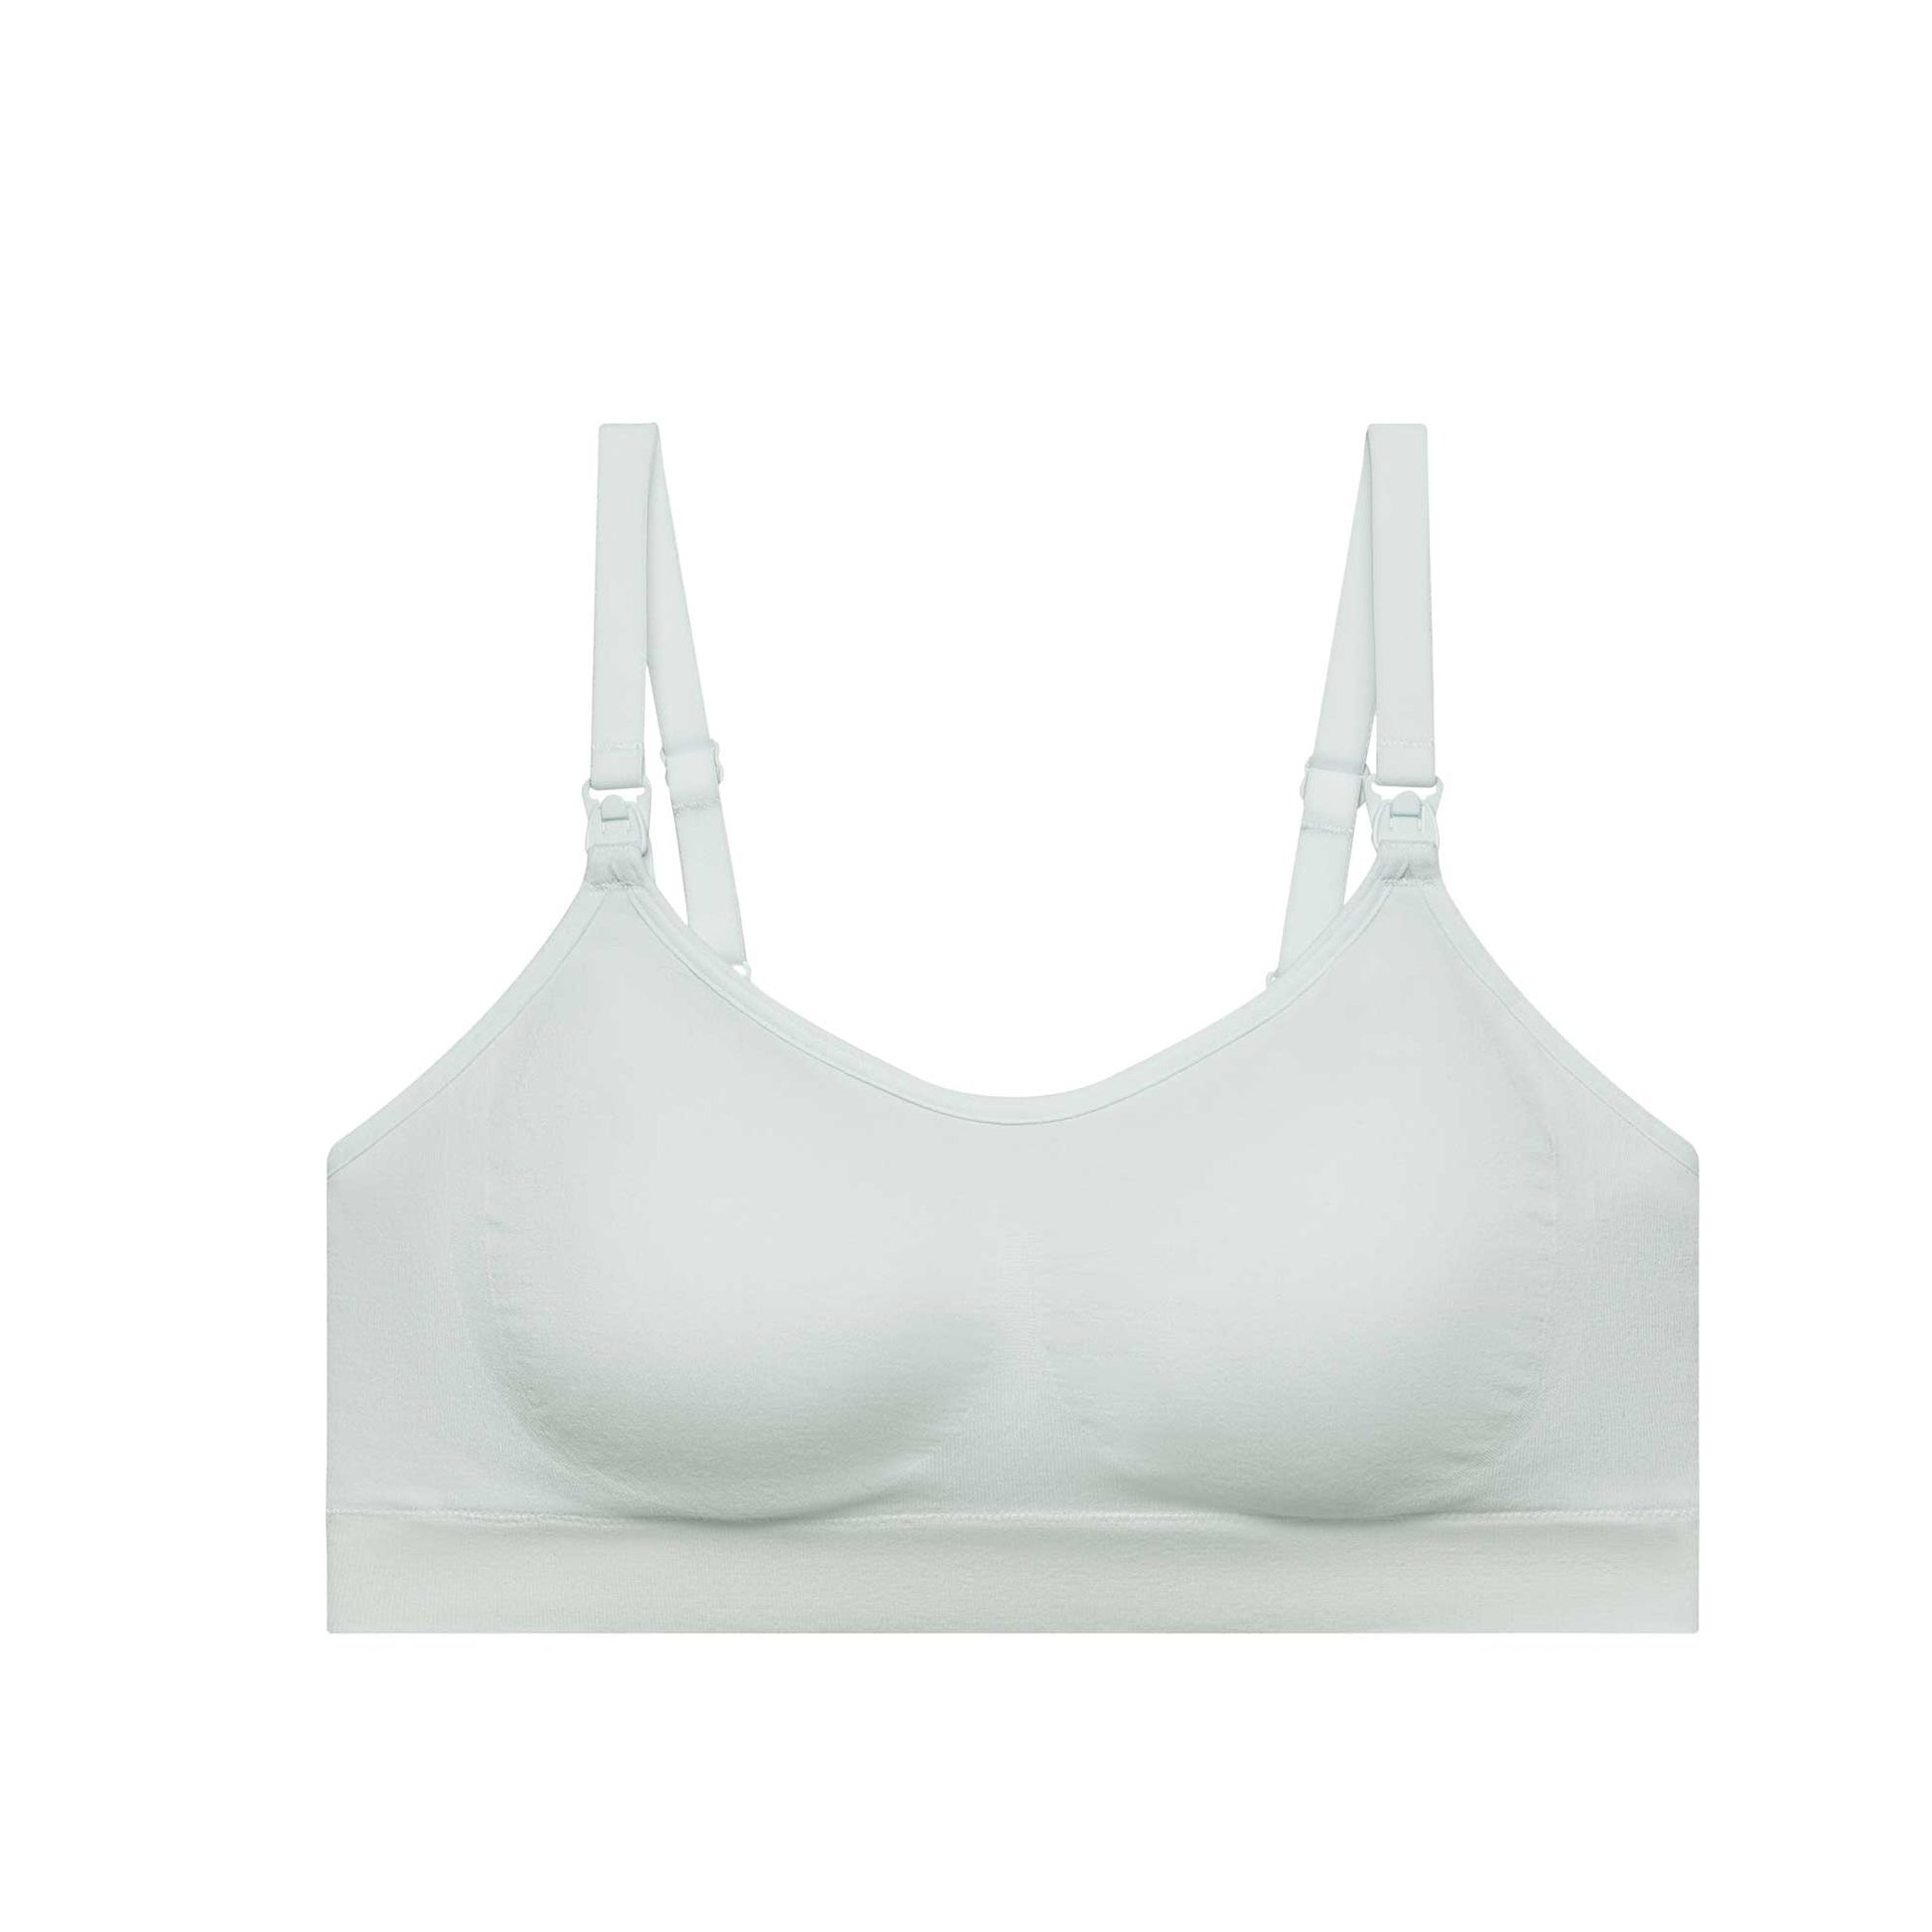 Shyaway on X: Keep an eye out for the best Nursing bra for hassle-free  feeding. Unique design, soft fabric, and a perfect fit are the three things  to look for in a bra ‍ ‍ . Shop now! #nursingbra # Shyaway #feedingbra